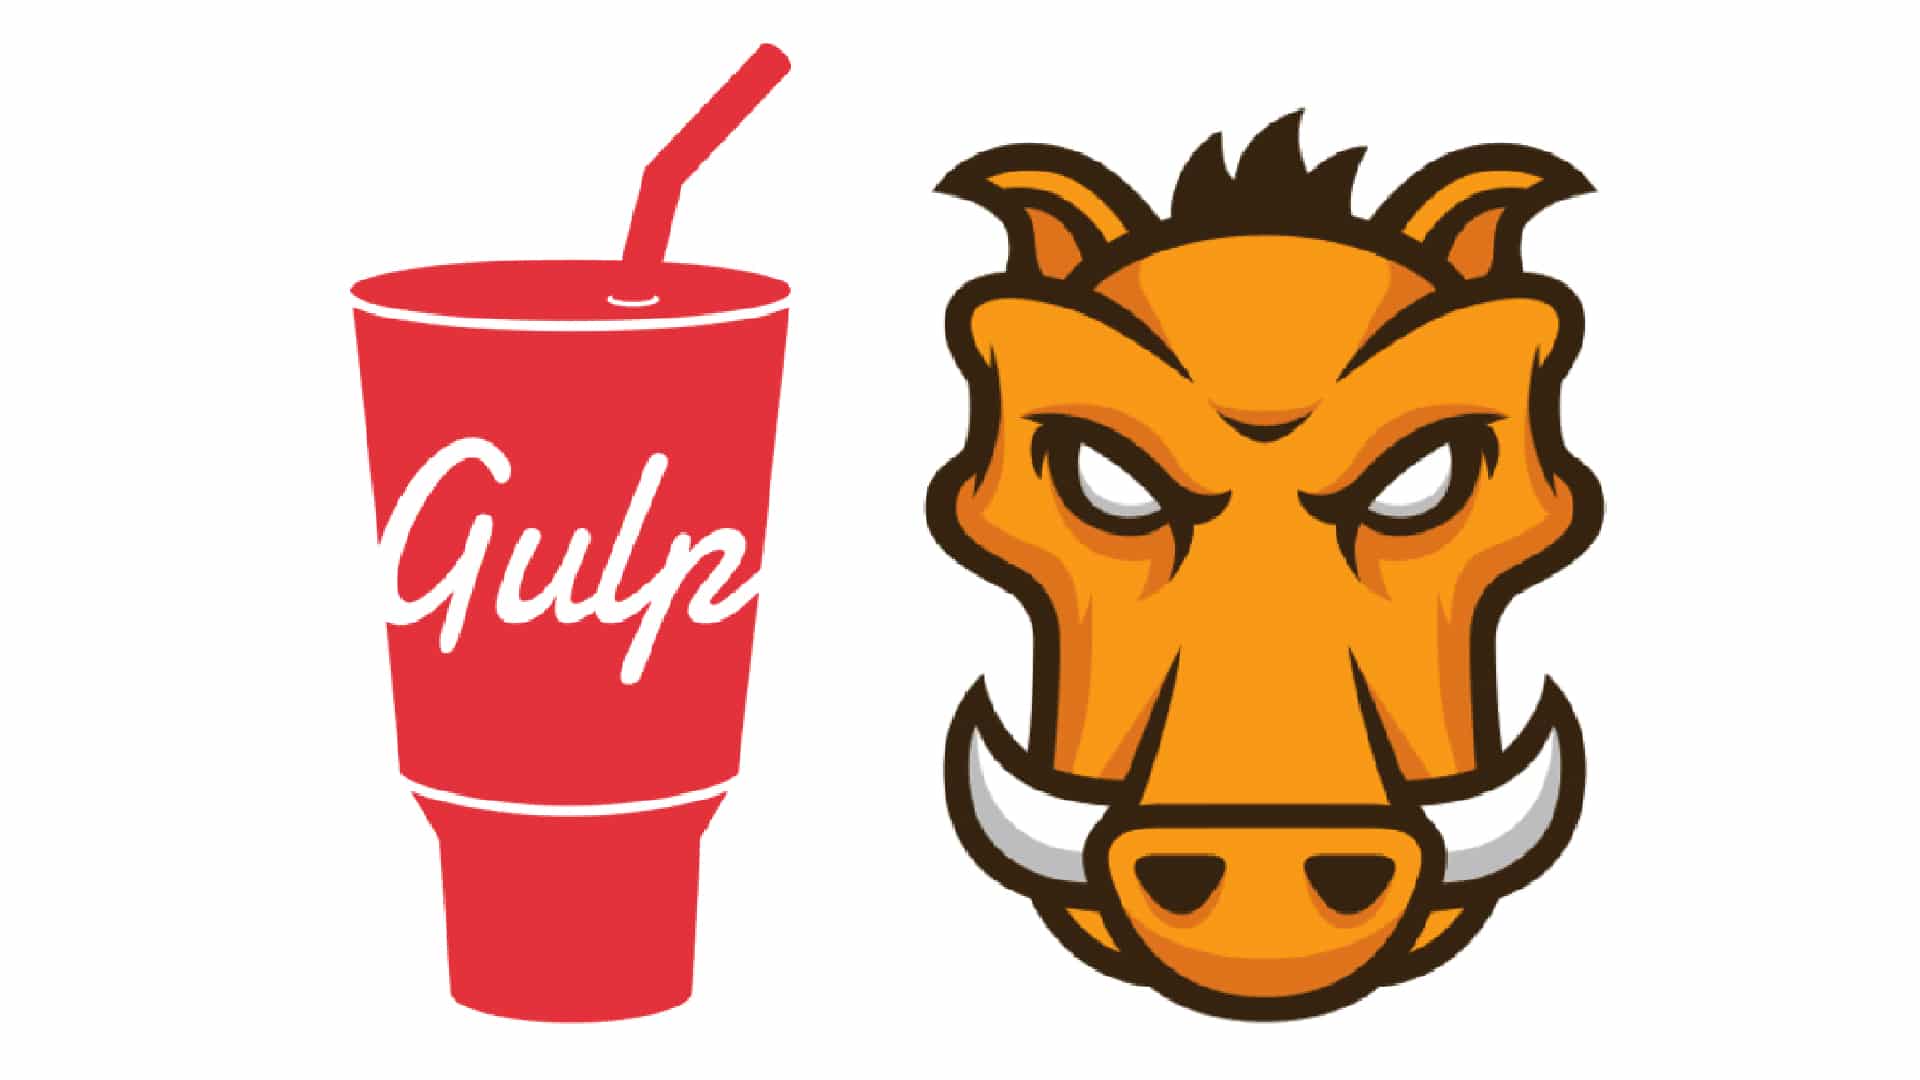 https://cohaesus.co.uk/wp-content/uploads/2020/04/managing_your_projects_with_gulp_grunt.jpg